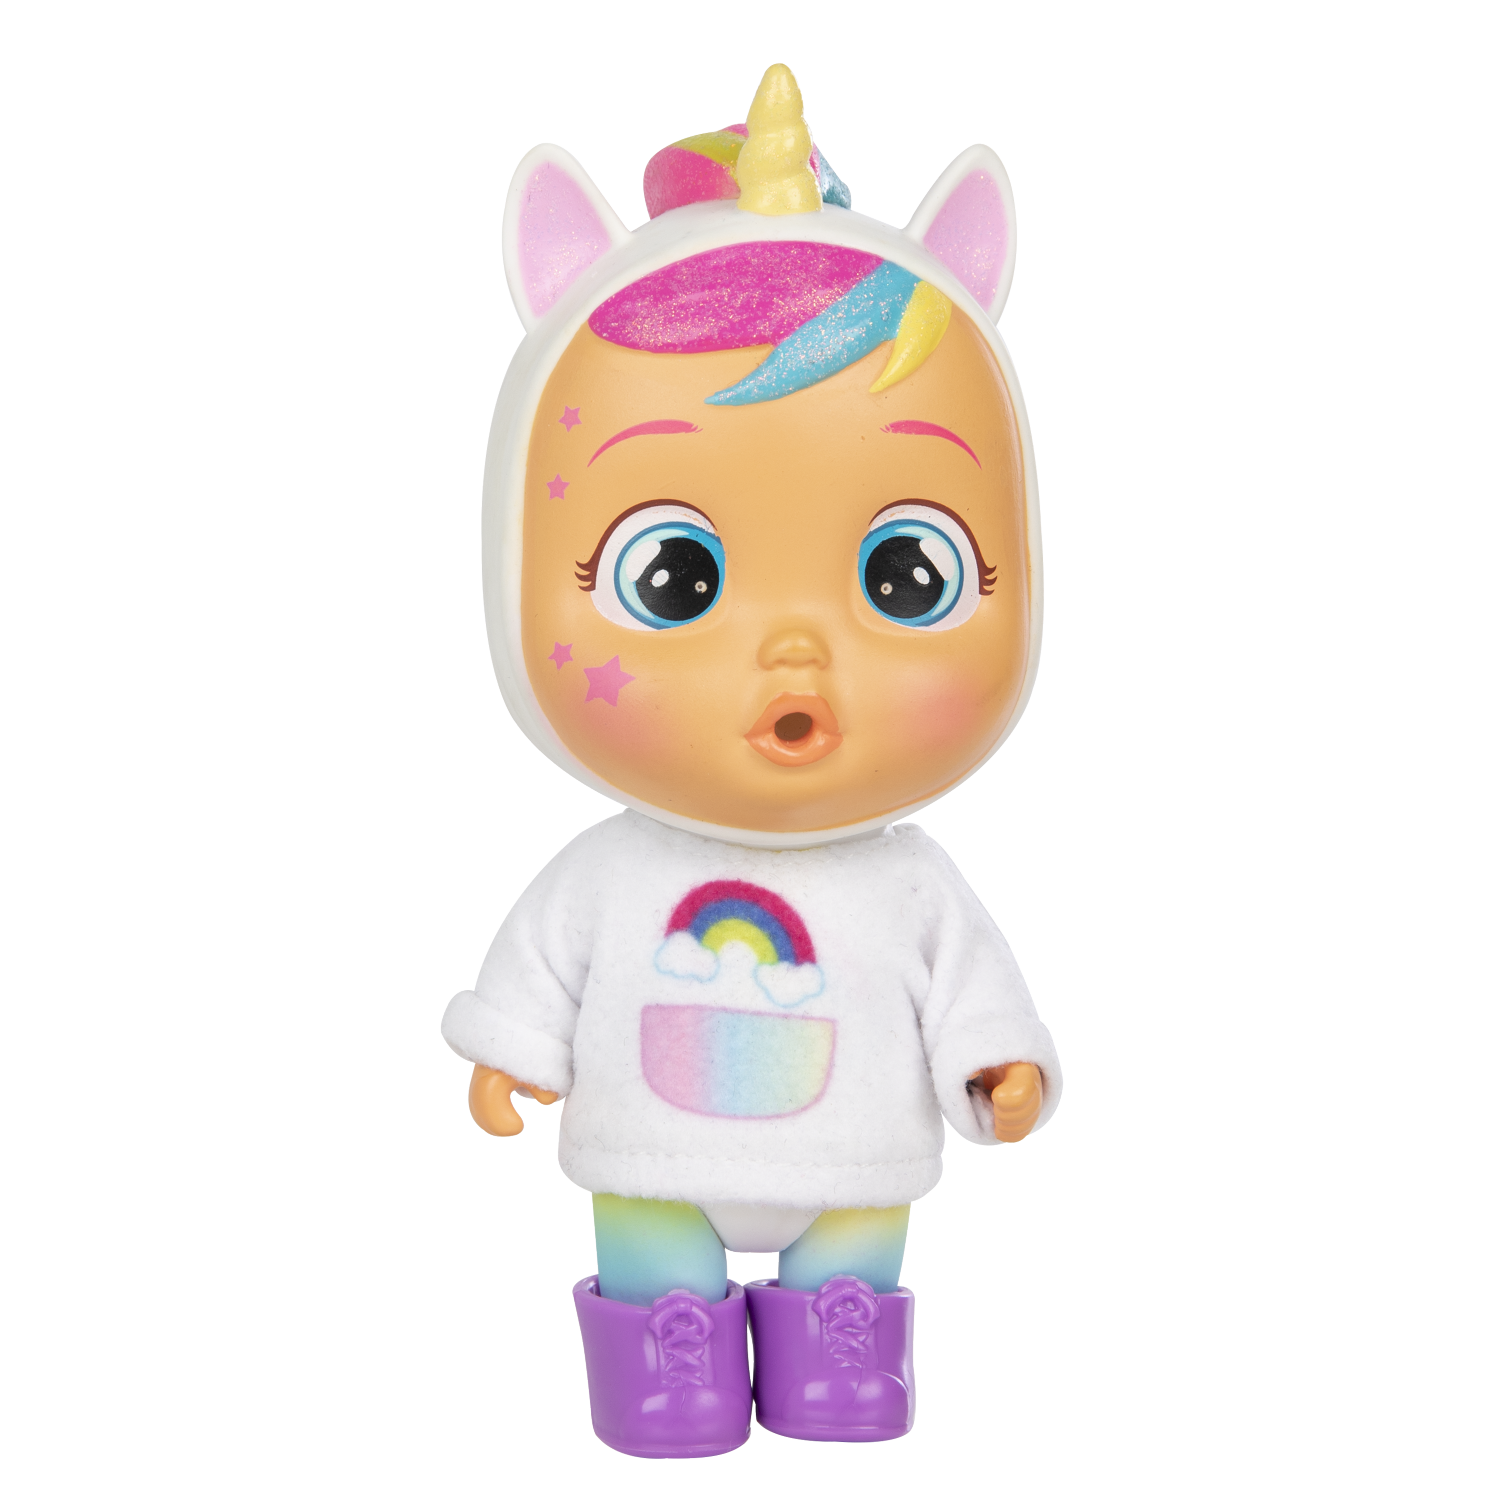 IMC Toys Cry Babies Magic Tears Doll in Capsule for sale online